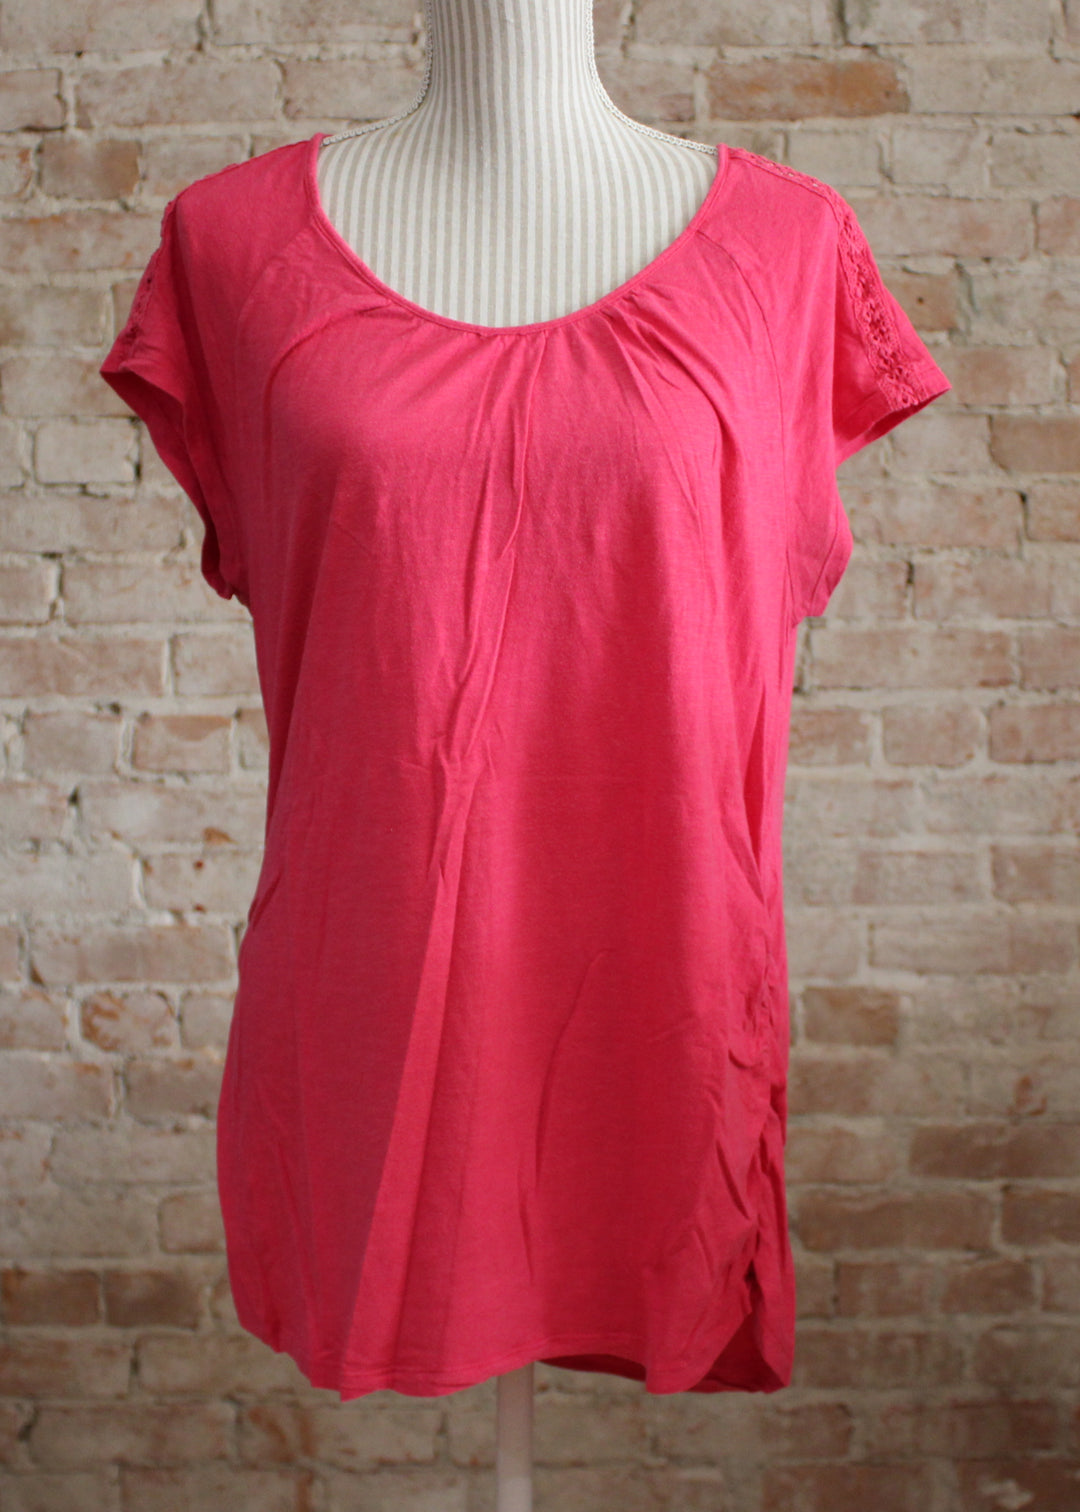 OLD NAVY MATERNITY PINK TOP LADIES LARGE VGUC